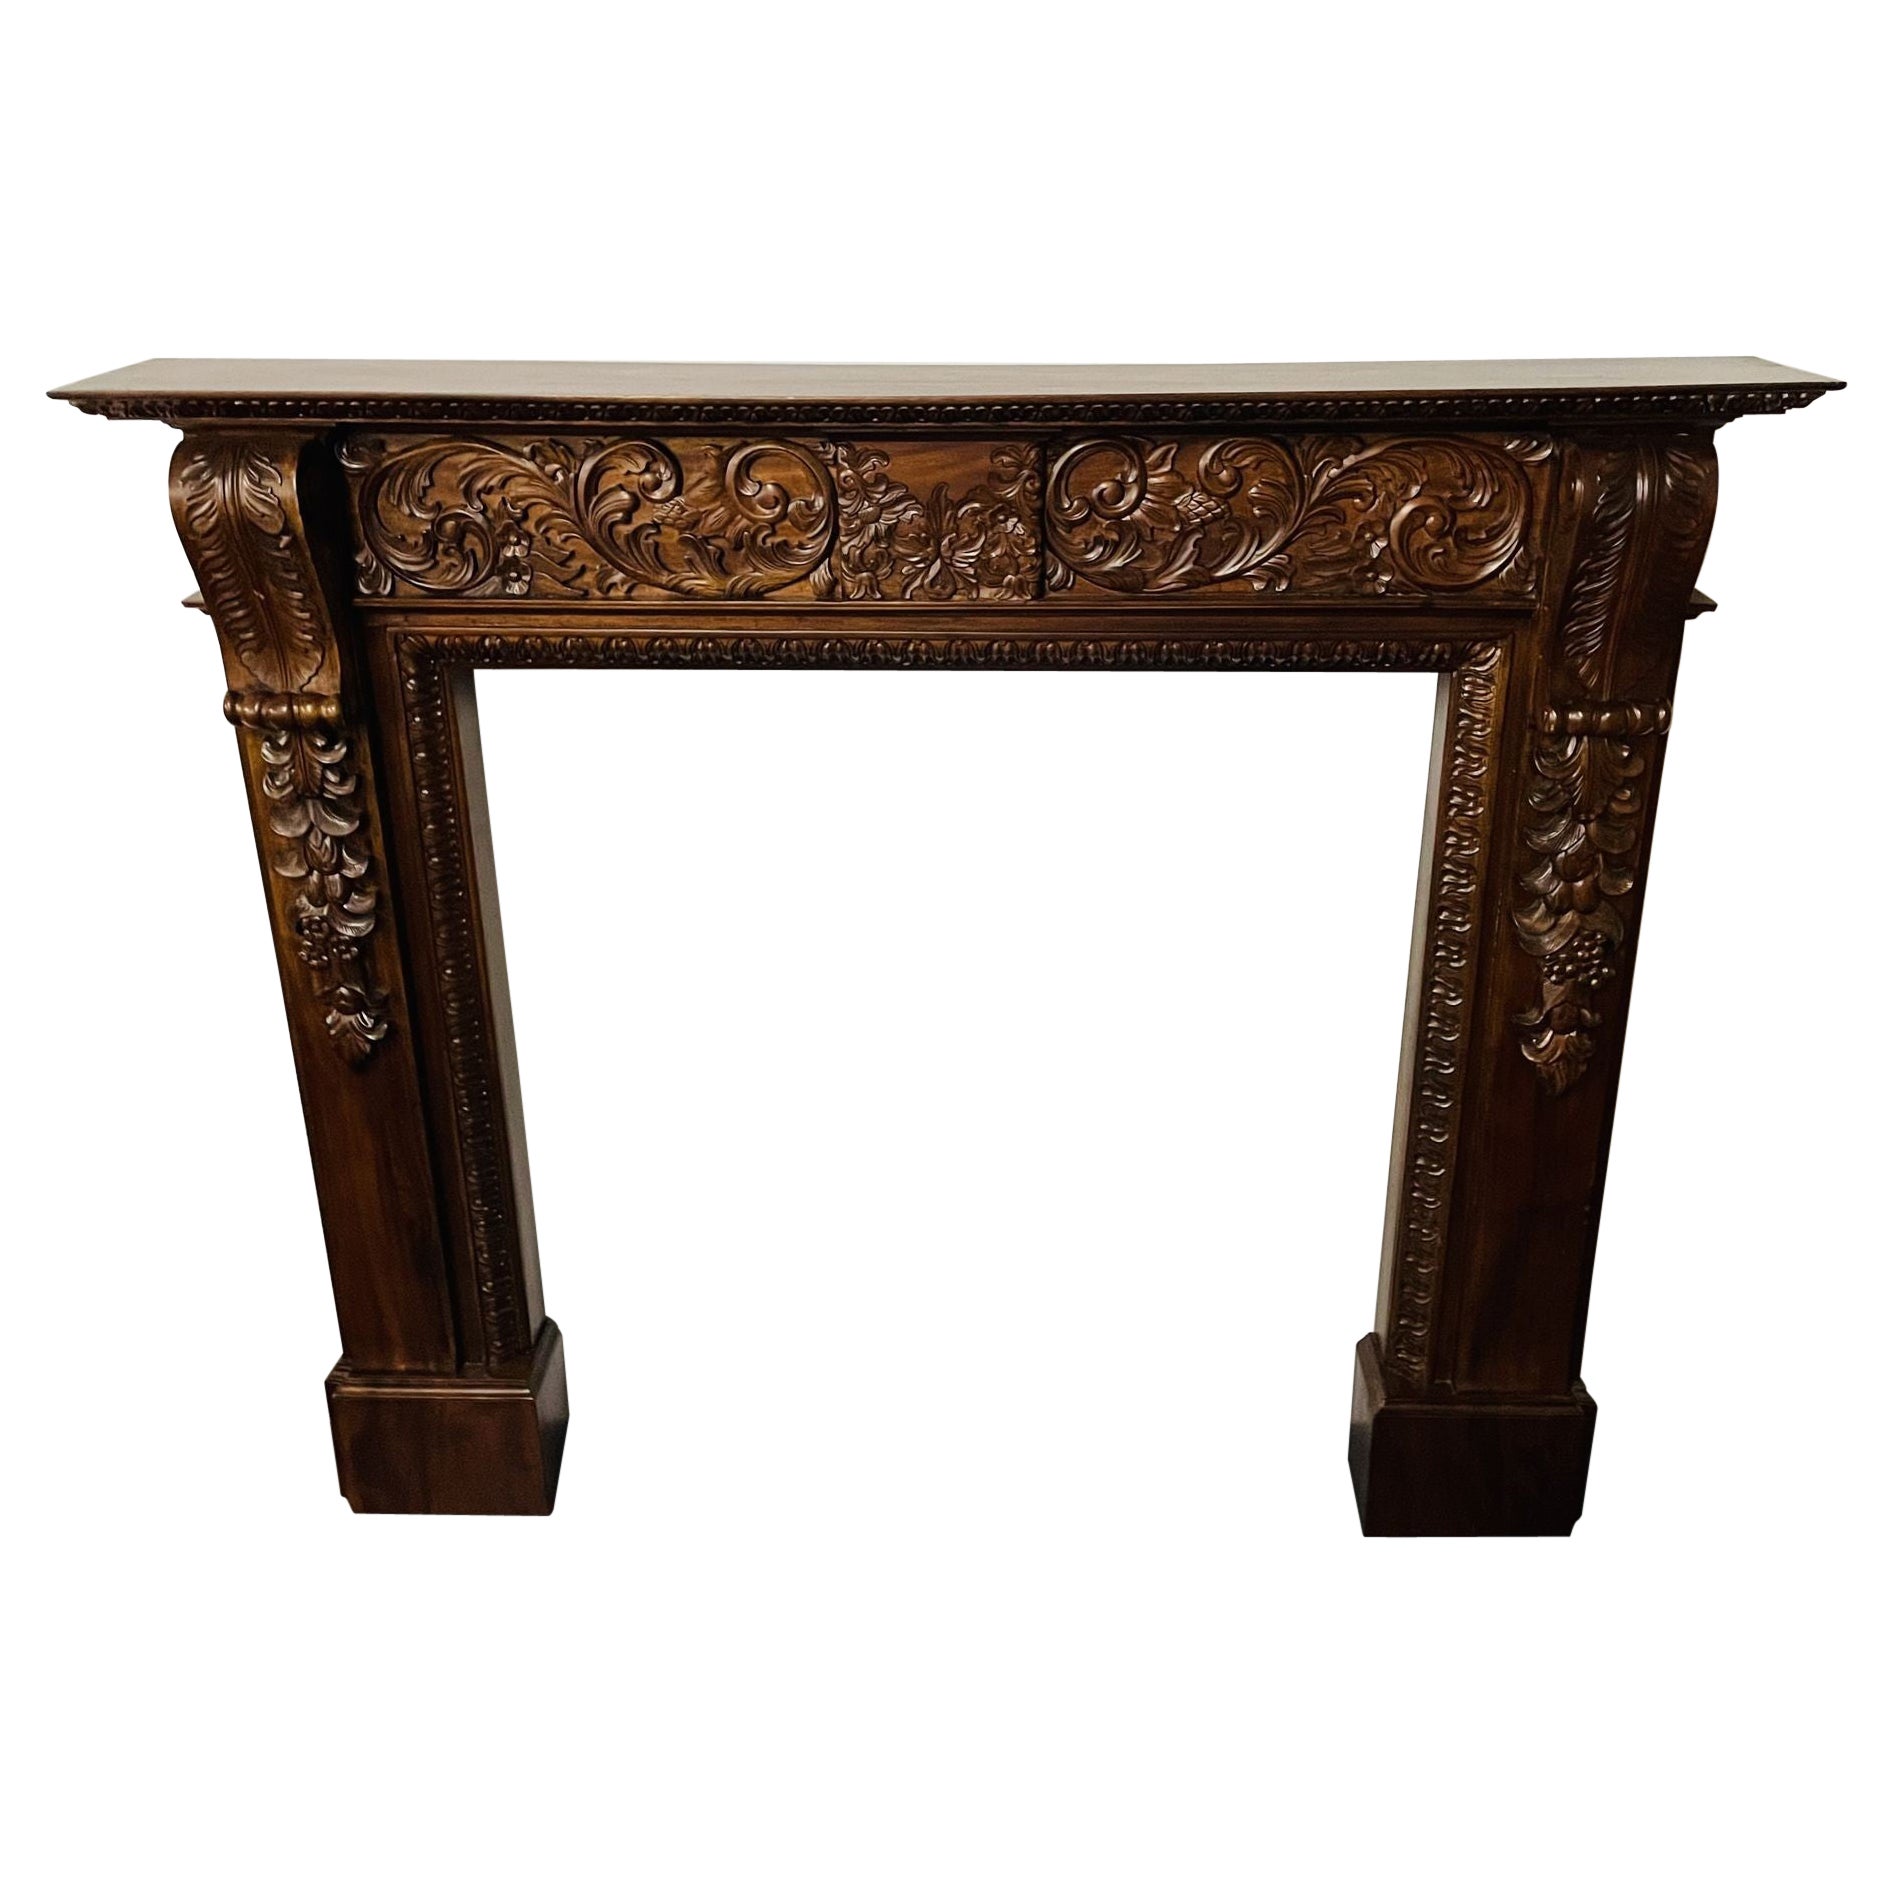 Georgian Fire Mantle, Fire Surround, Solid Mahogany Carved, Cabinet Maker